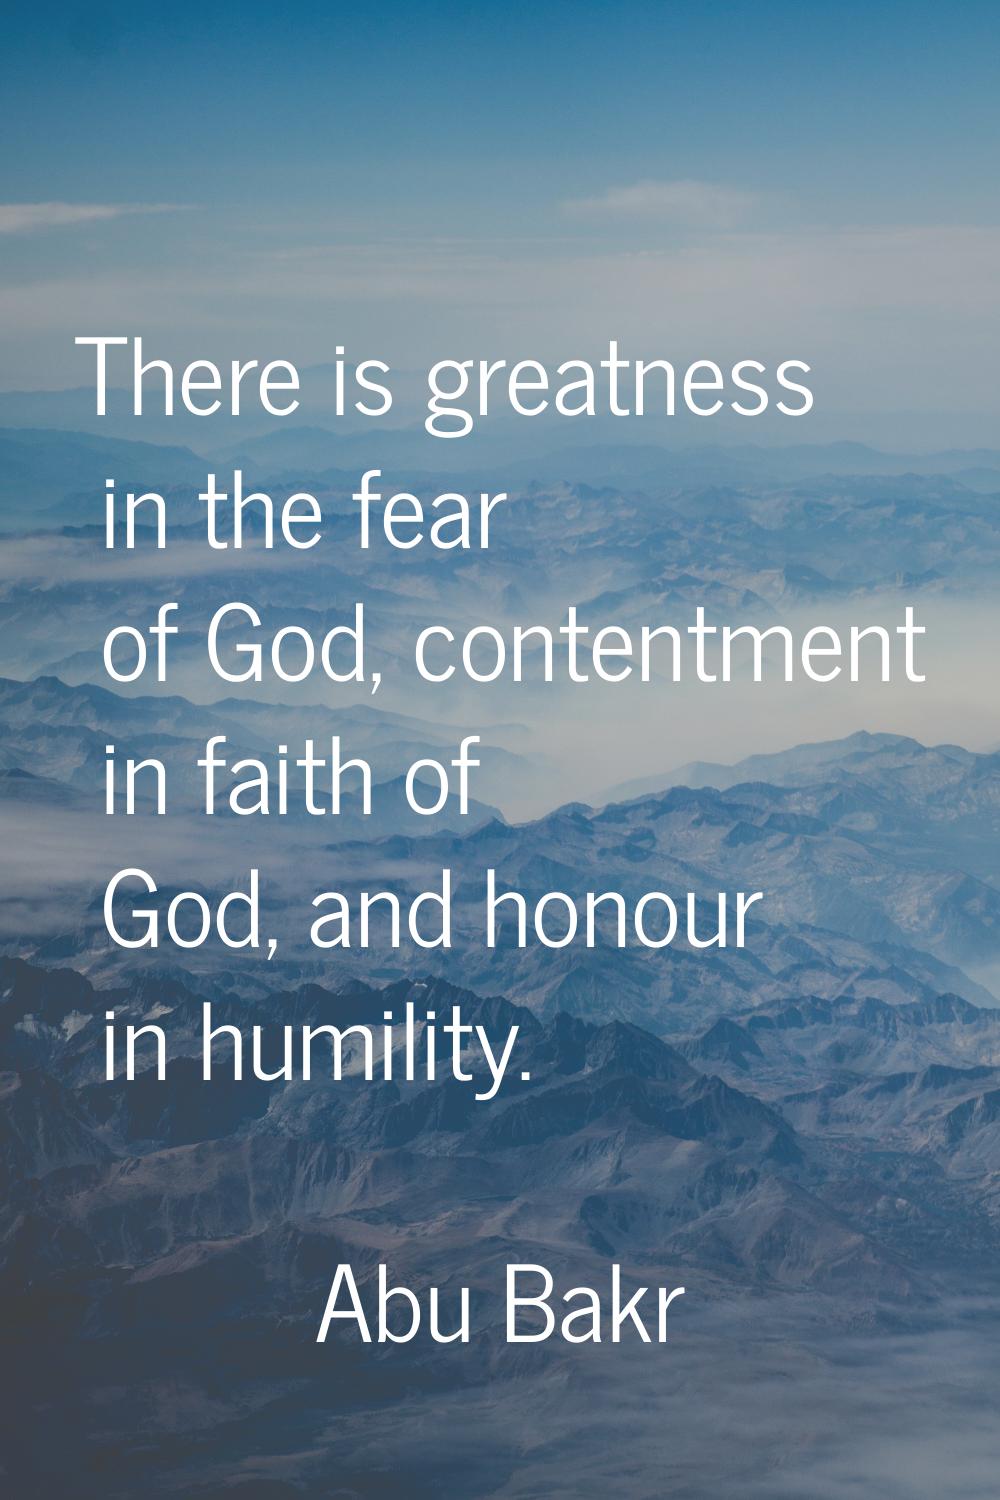 There is greatness in the fear of God, contentment in faith of God, and honour in humility.